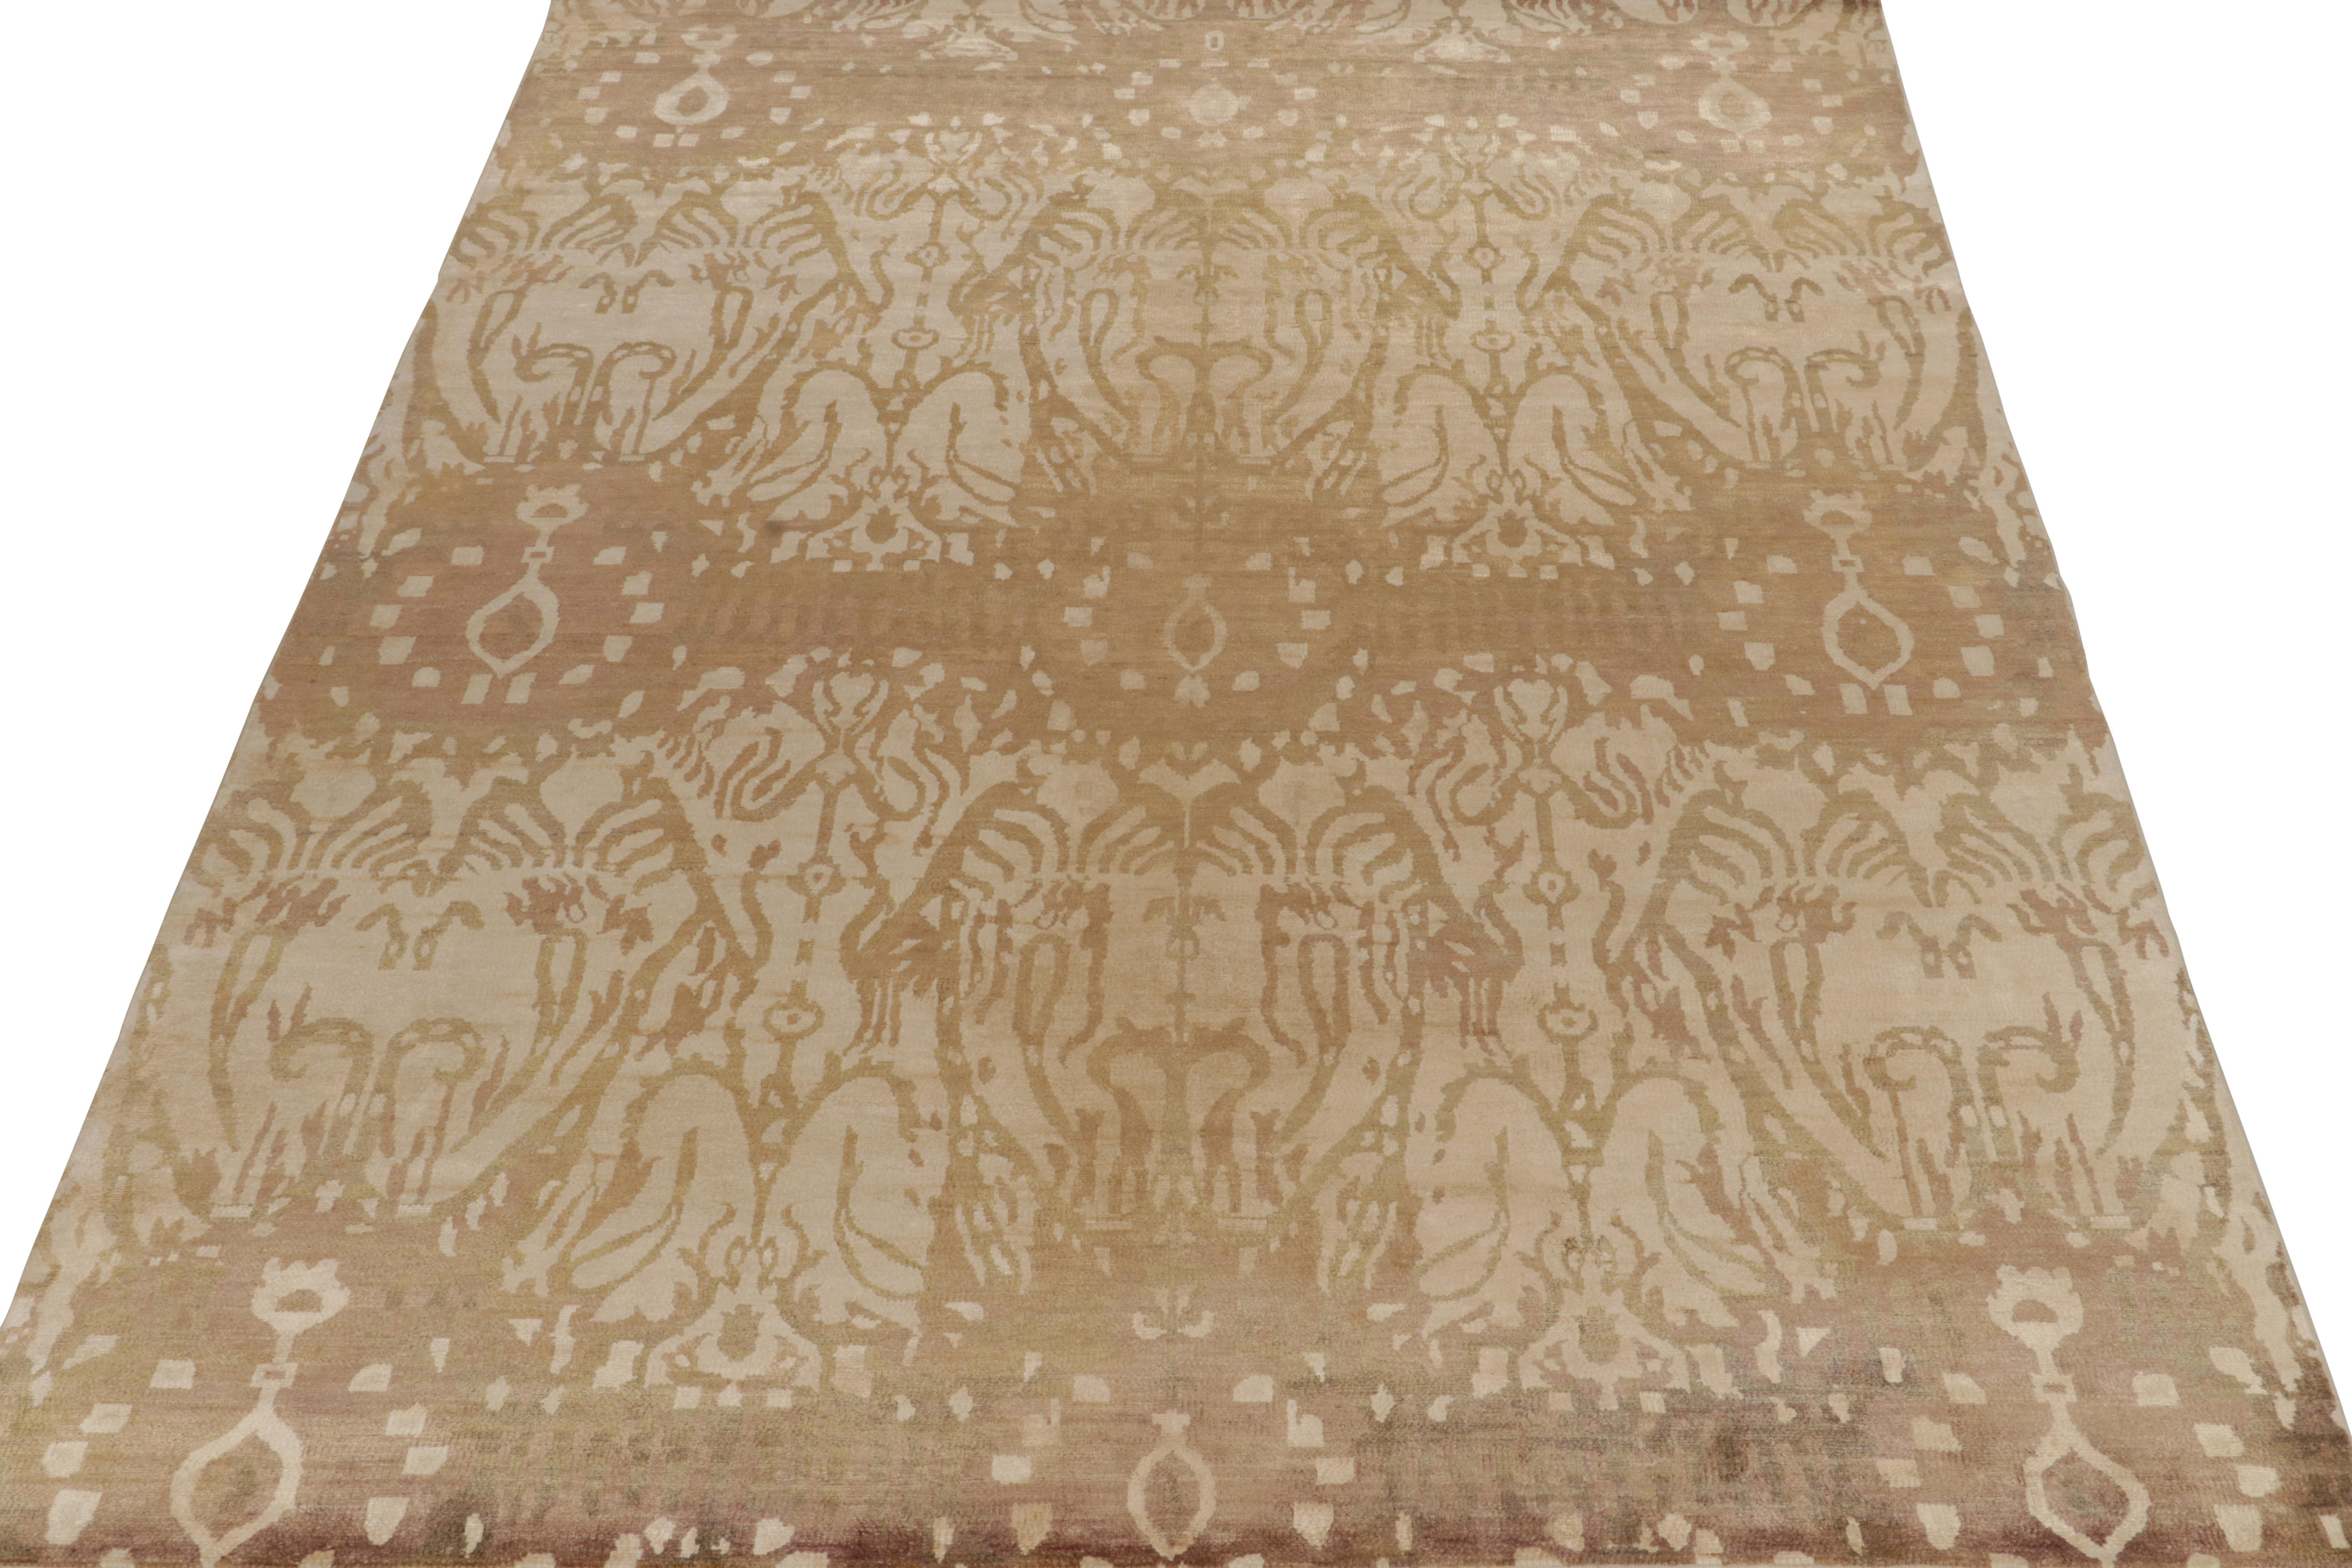 Indian Rug & Kilim’s Classic-Style Contemporary Rug in Beige-Brown Ikats Patterns For Sale